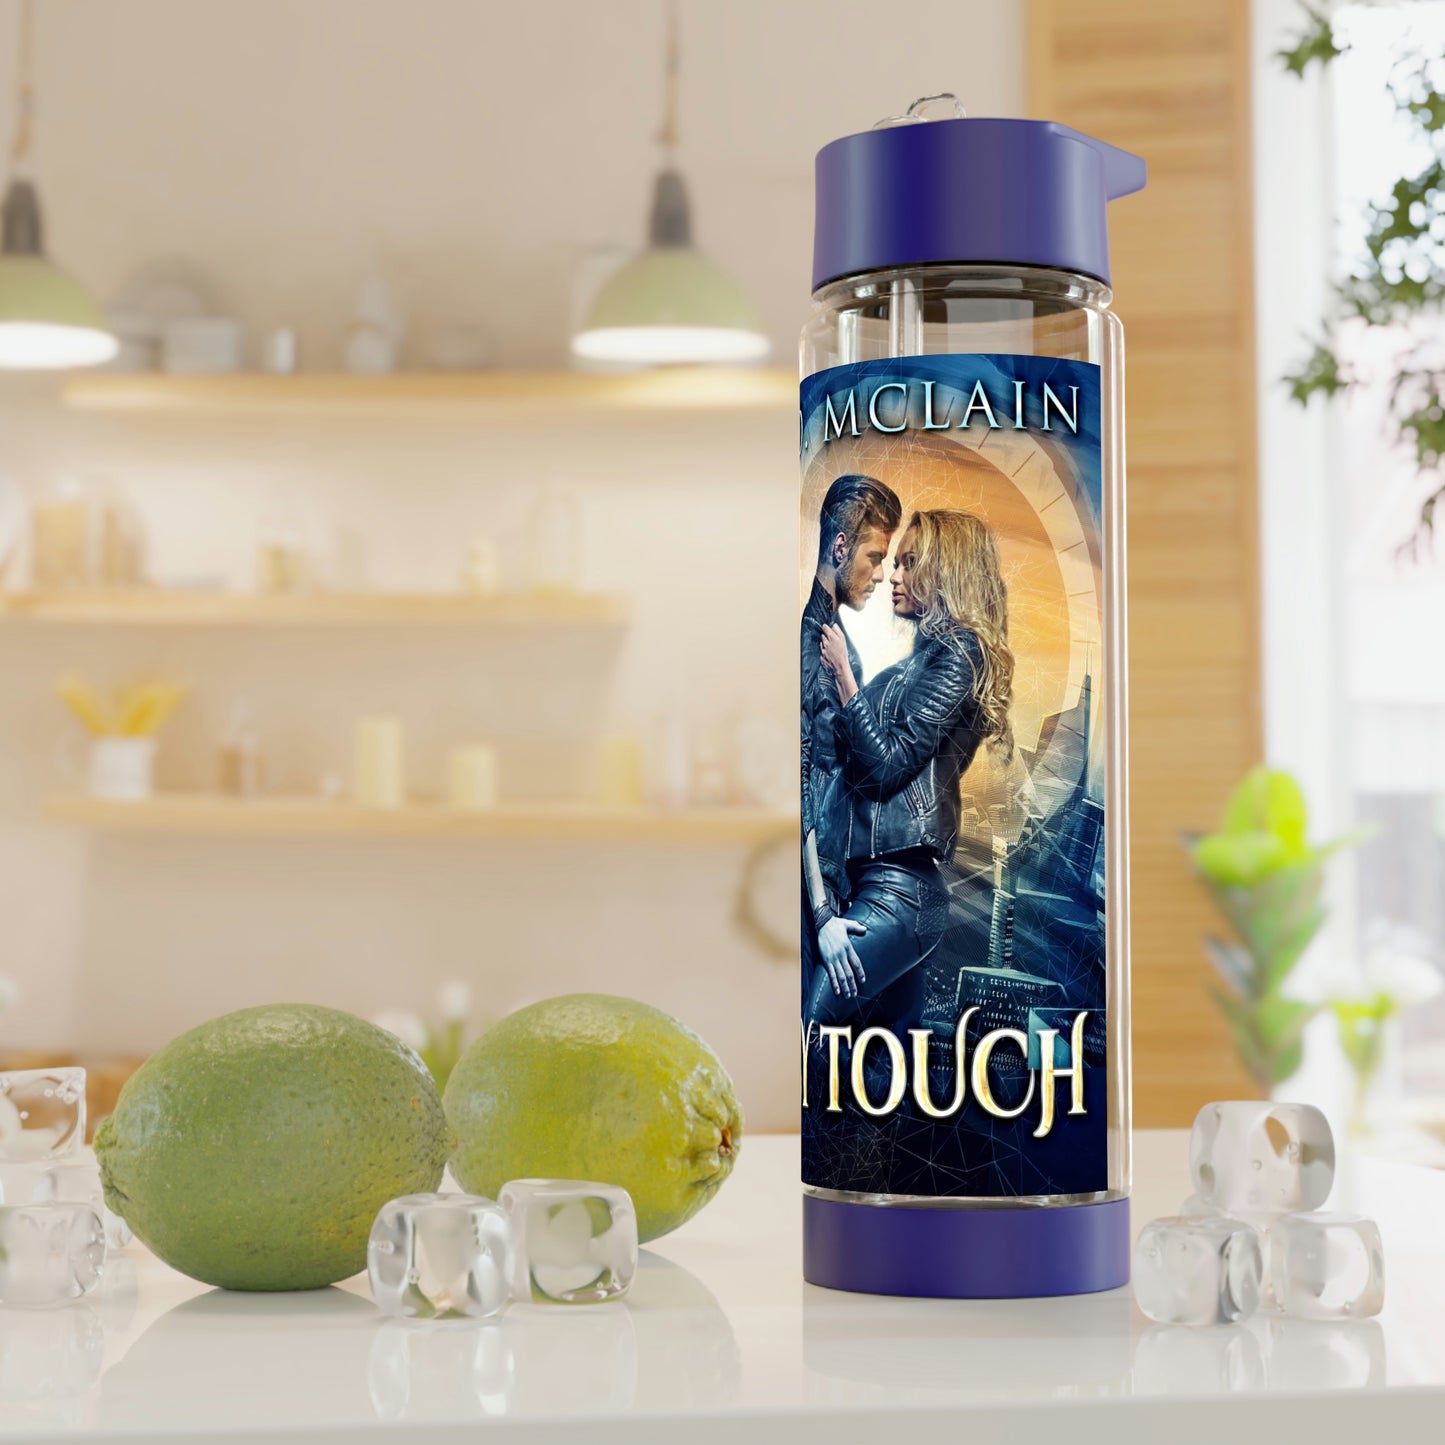 Psy Touch - Infuser Water Bottle